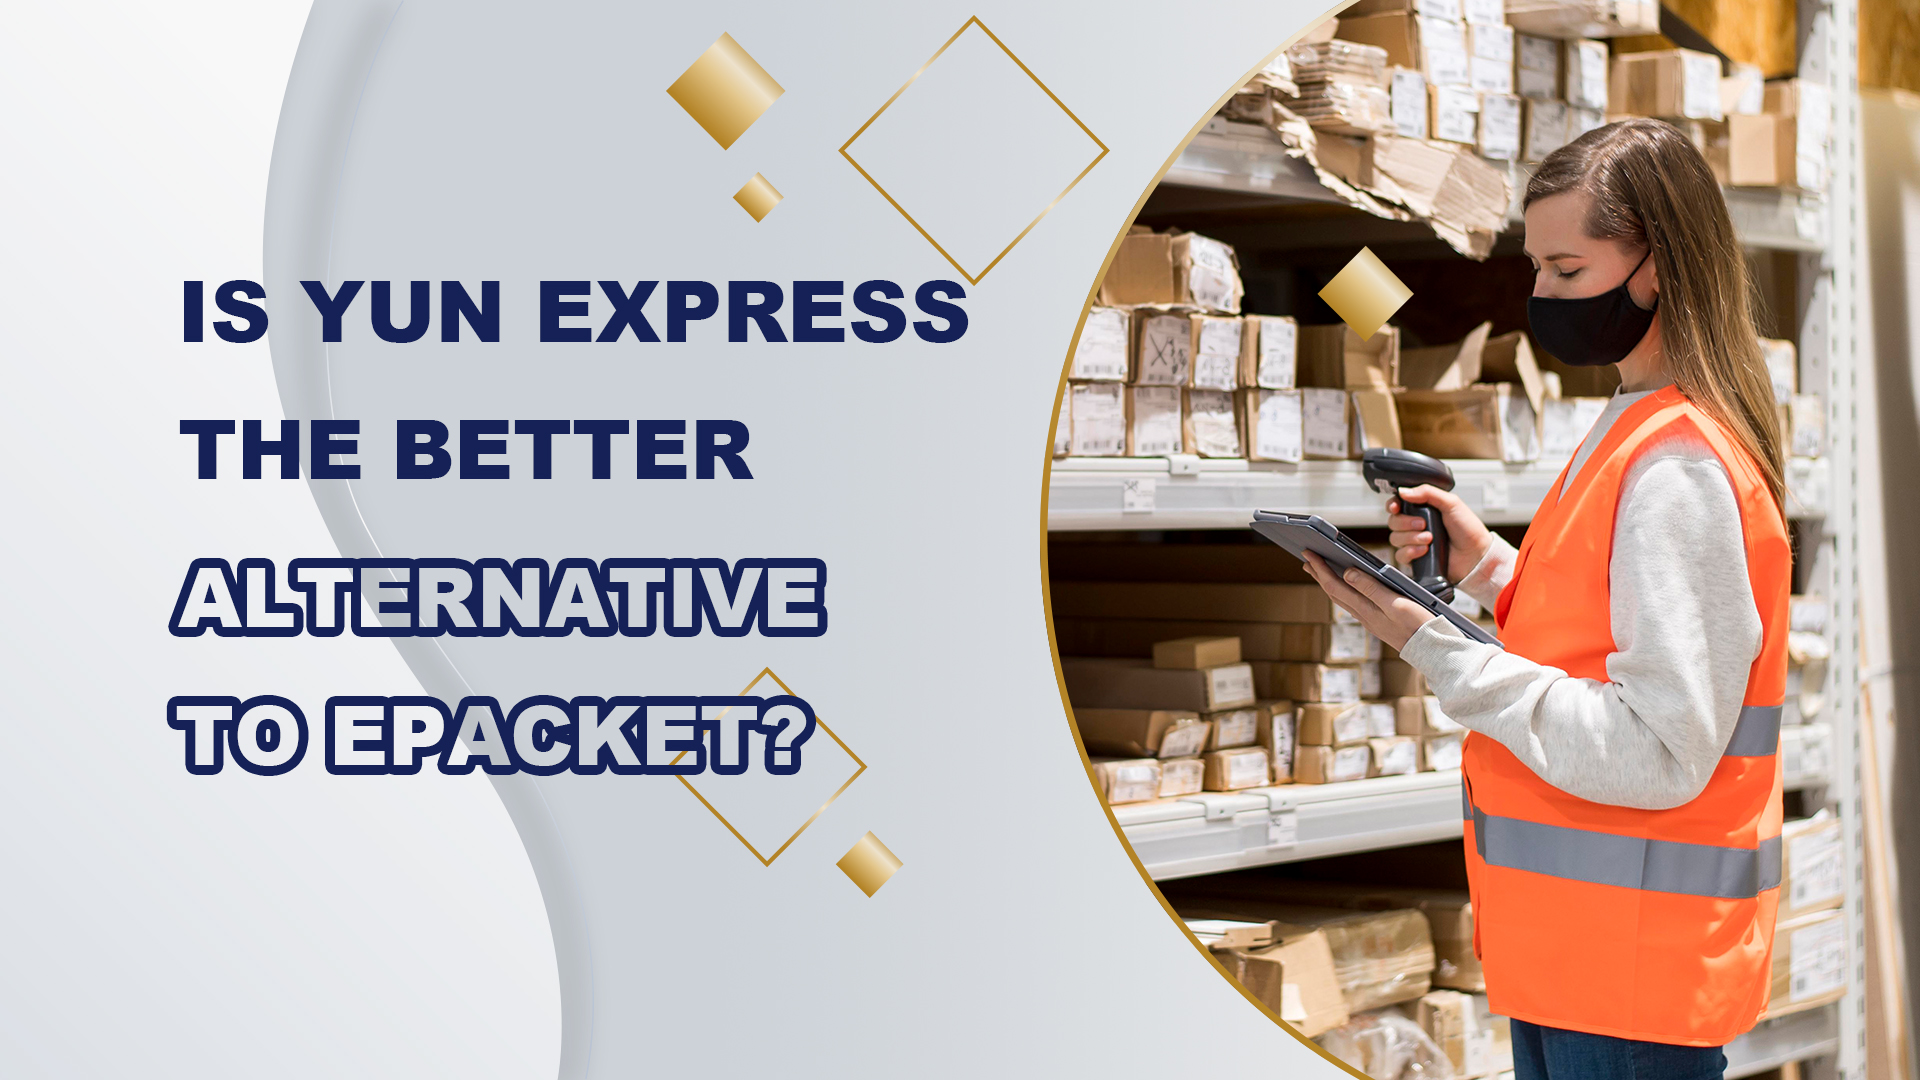 Is YunExpress the better alternative to ePacket? - CJ Dropshipping